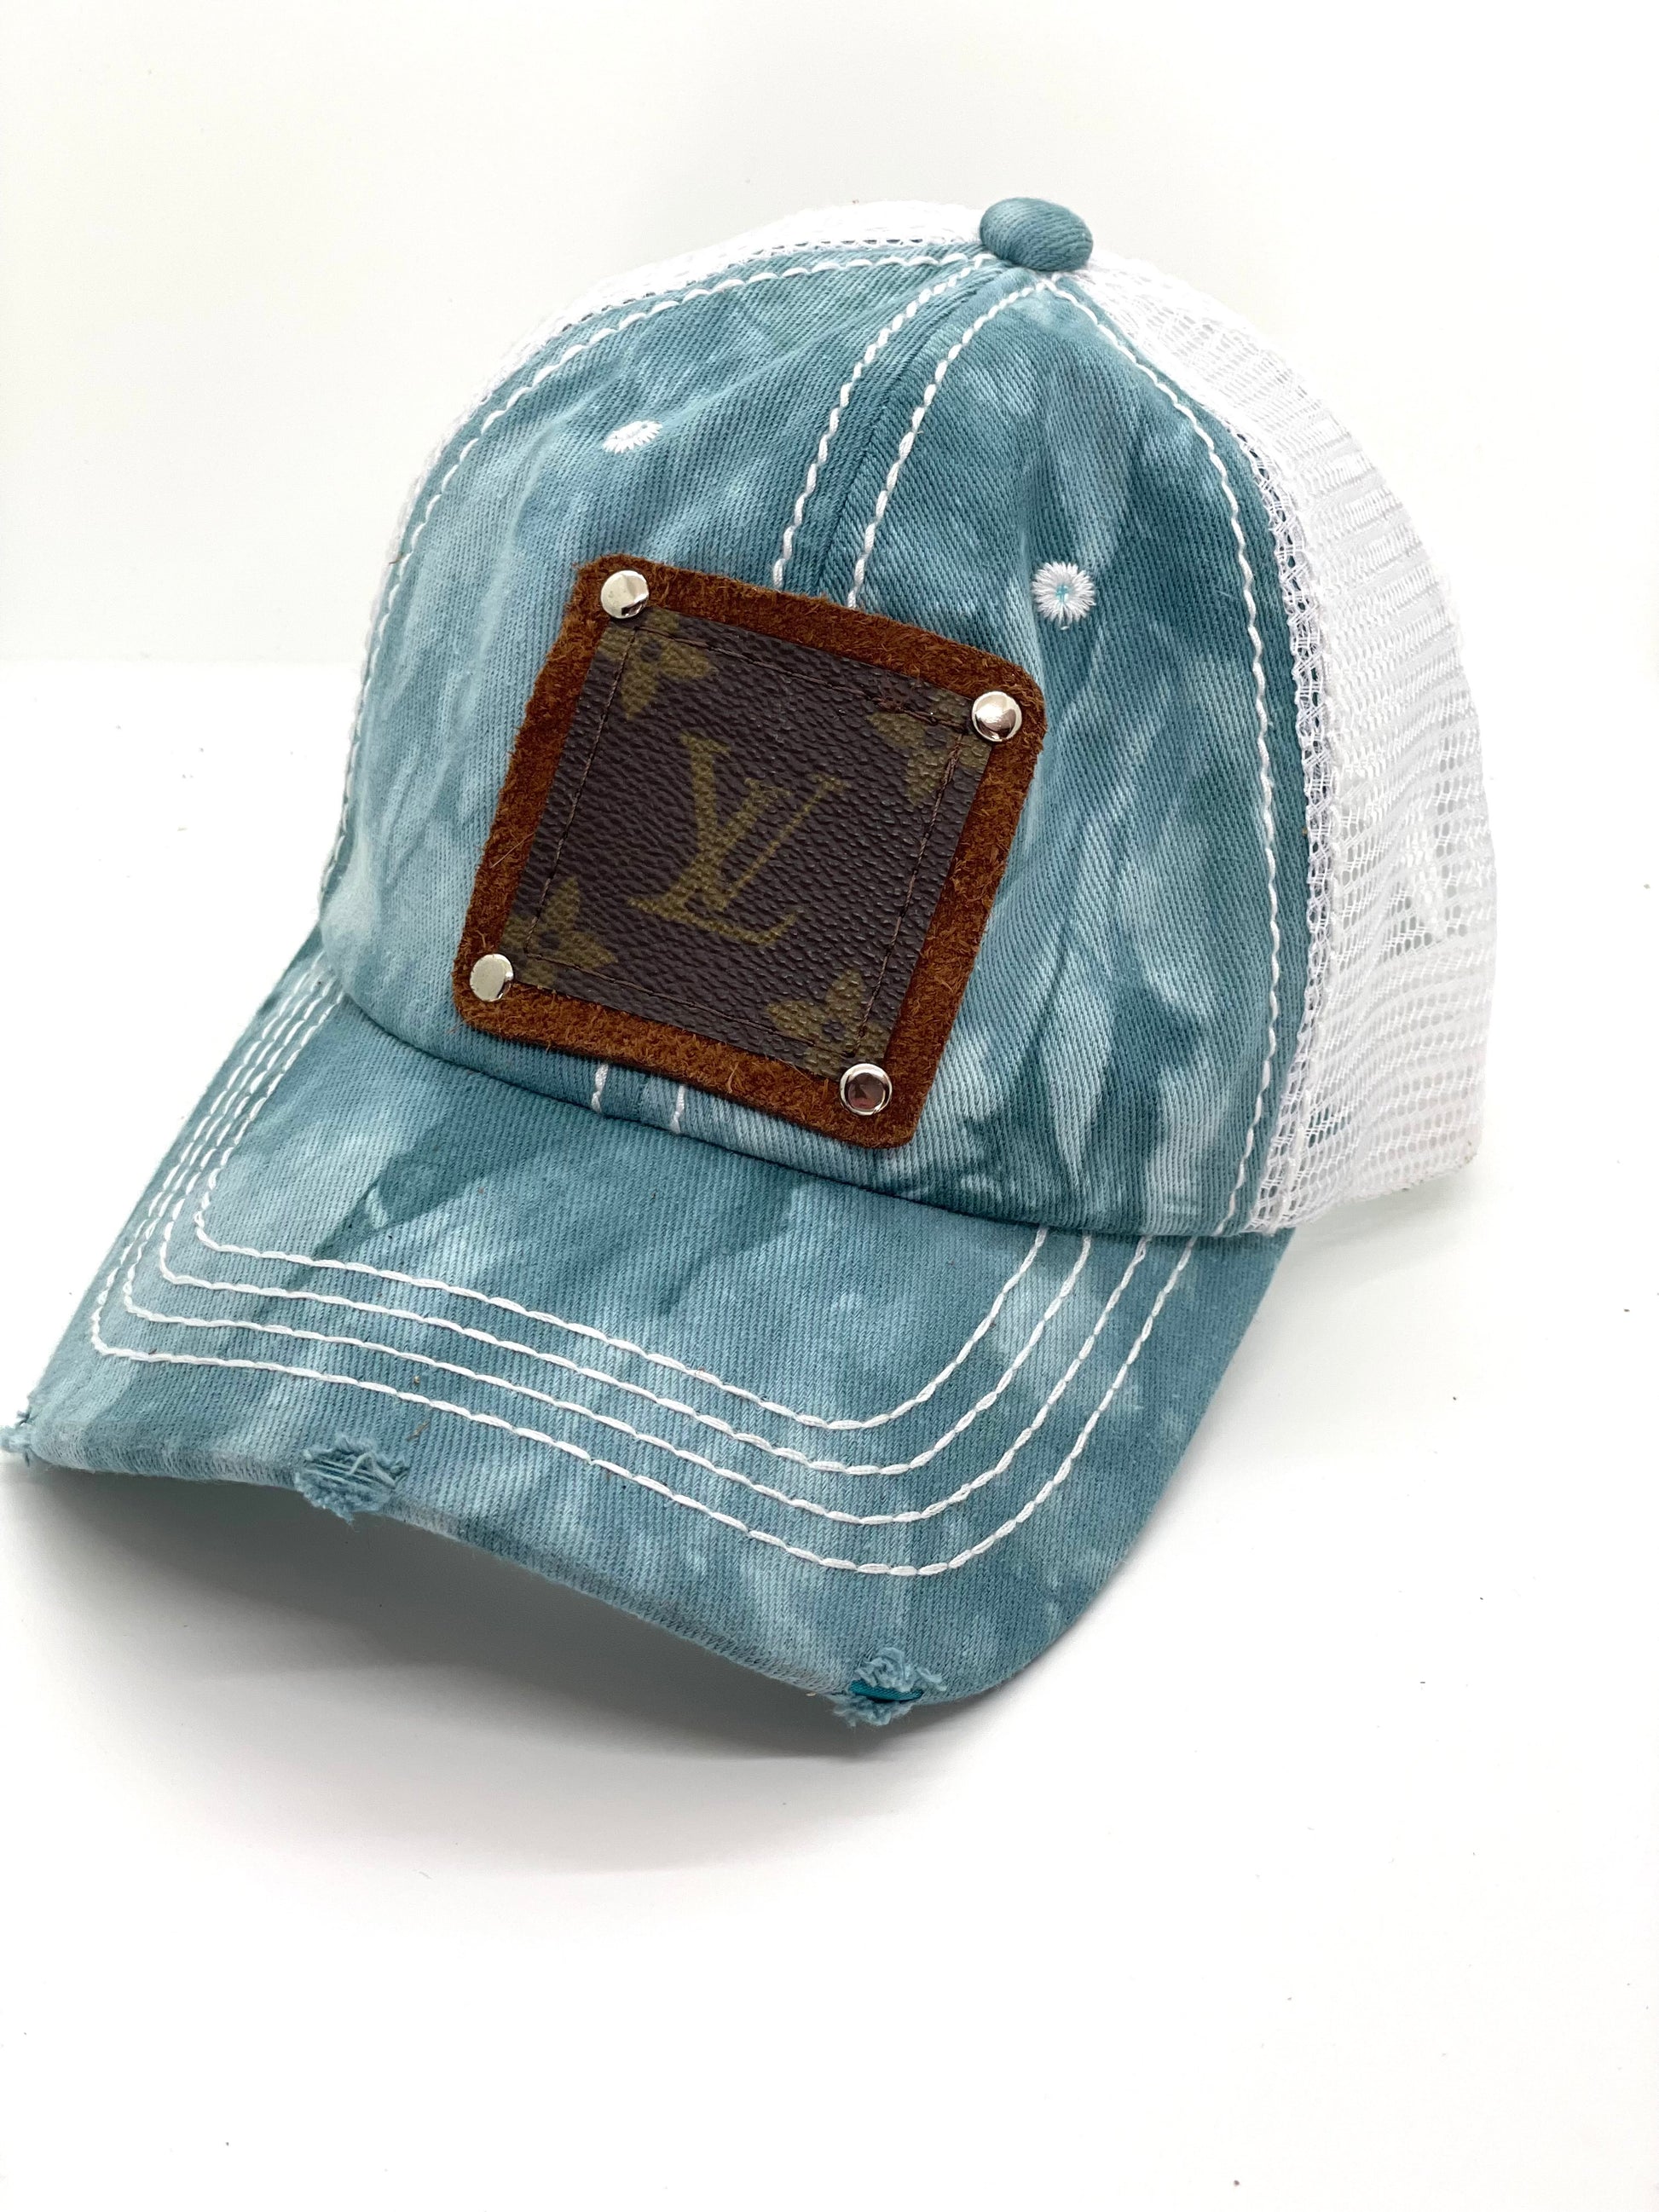 PP2 - Caicos- Blue and White Tye Dye hat Brown/Antique - Patches Of Upcycling